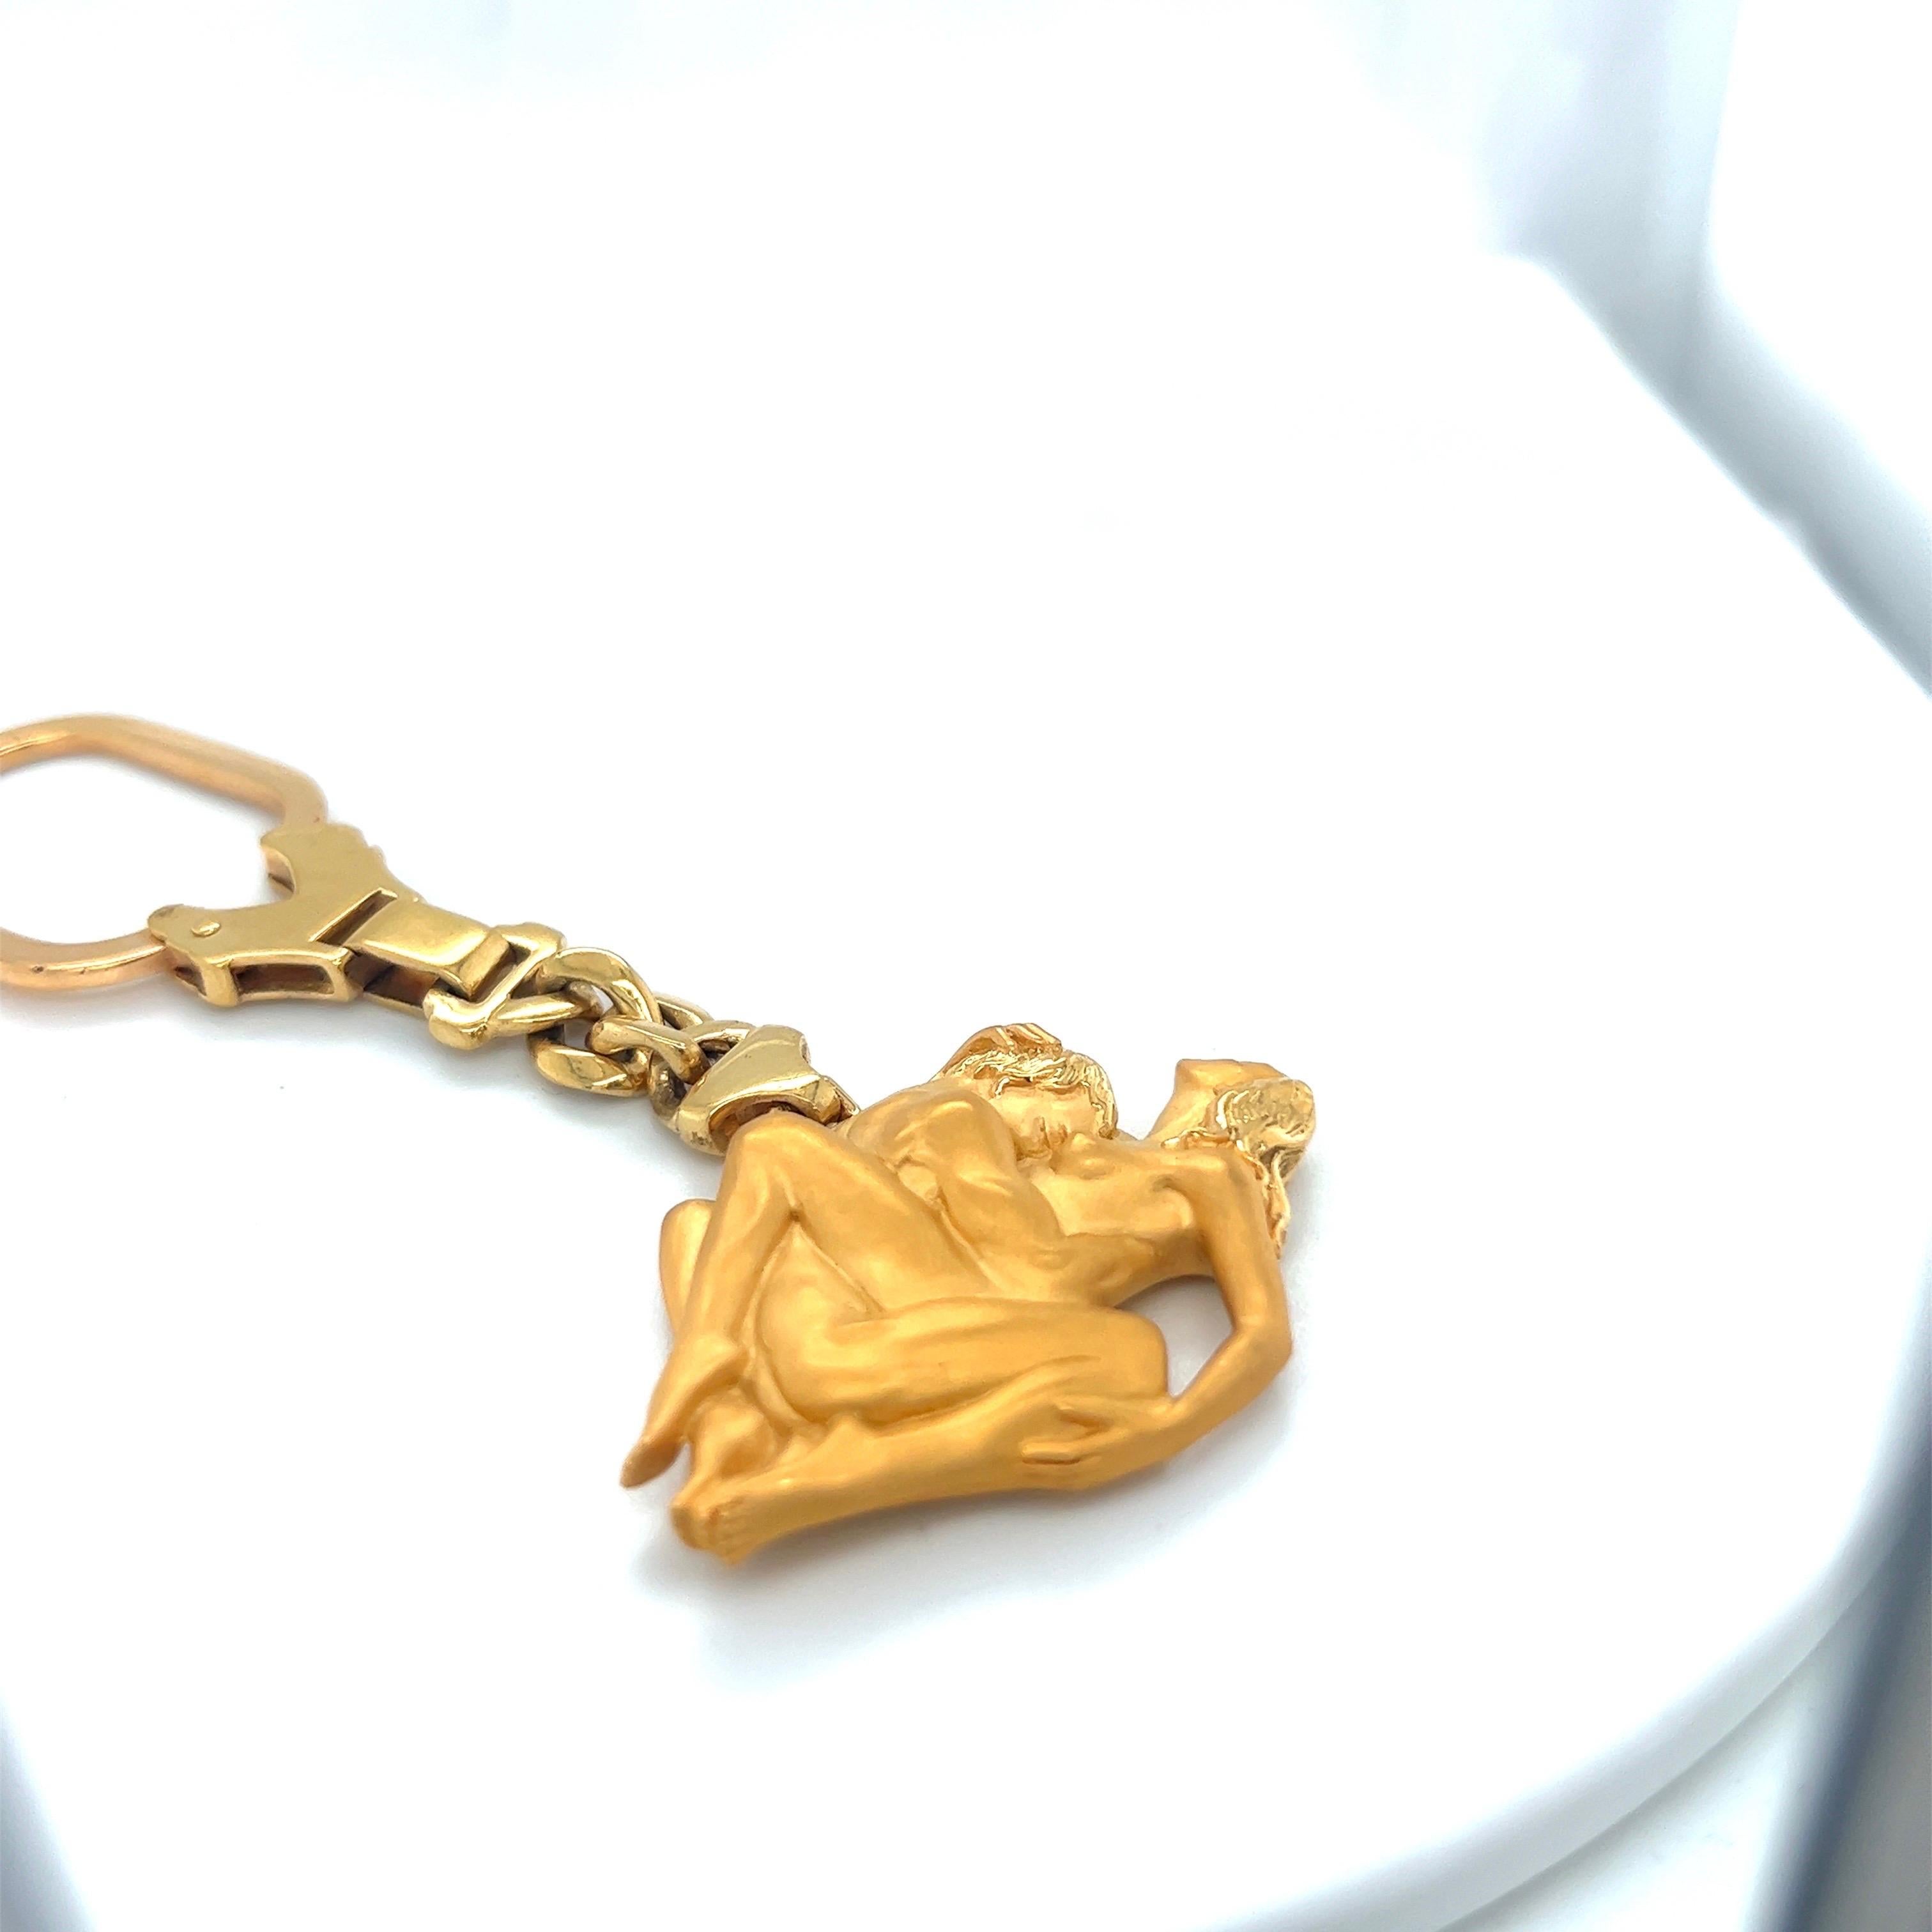 Art Nouveau Carrera Y Carrera 18 KT Yellow Gold Lovers Key Chain For Sale